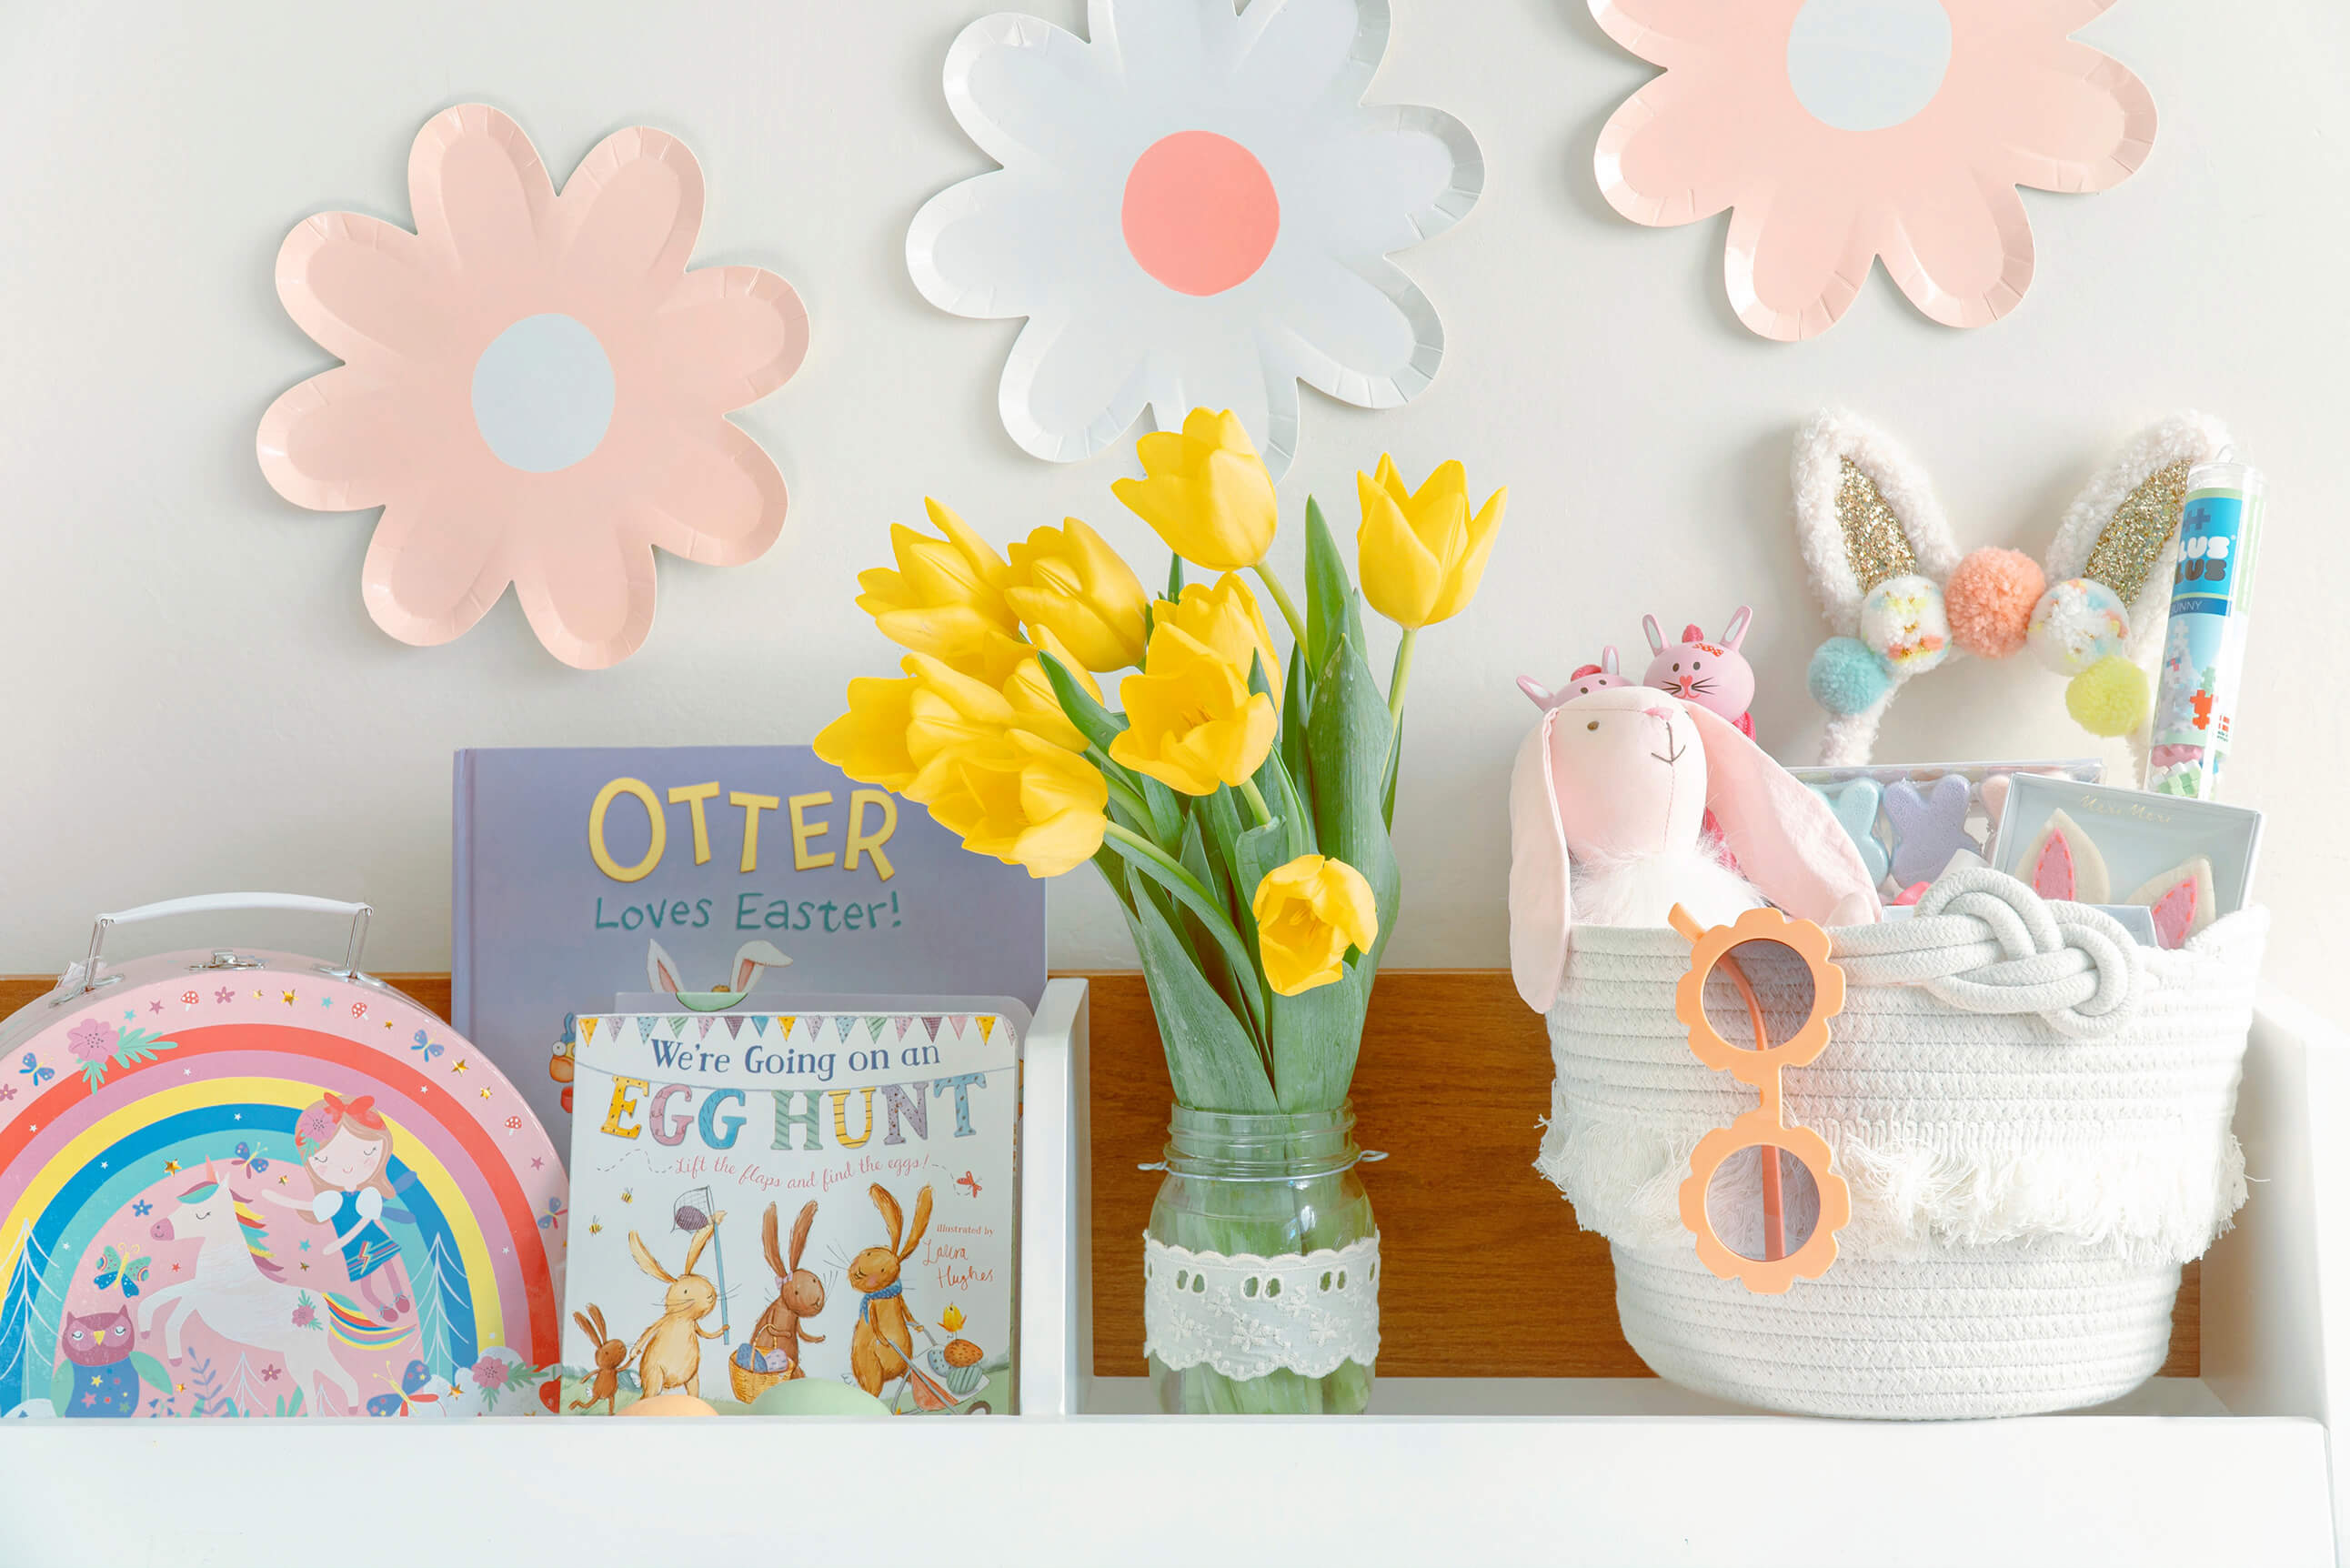 The Most Adorable Easter Crafts And Activities For Kids - Sunshine